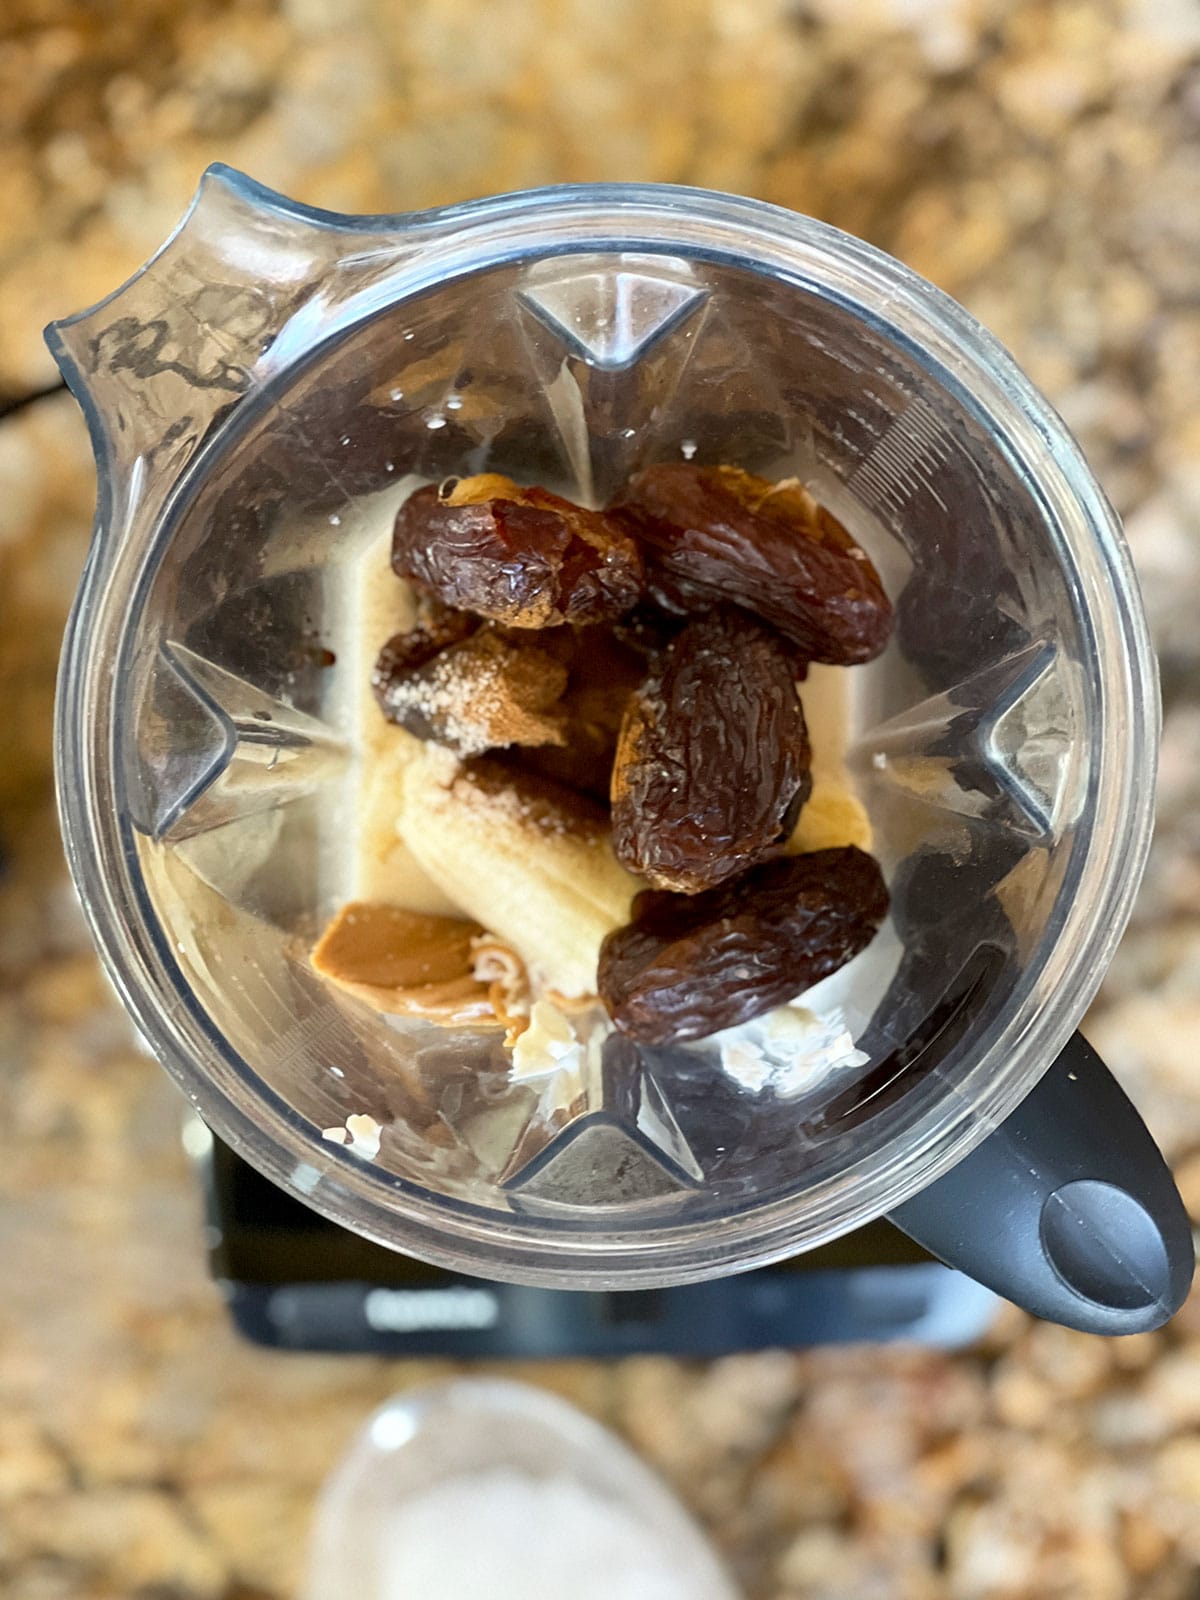 Top down view of blender with dates and bananas showing.